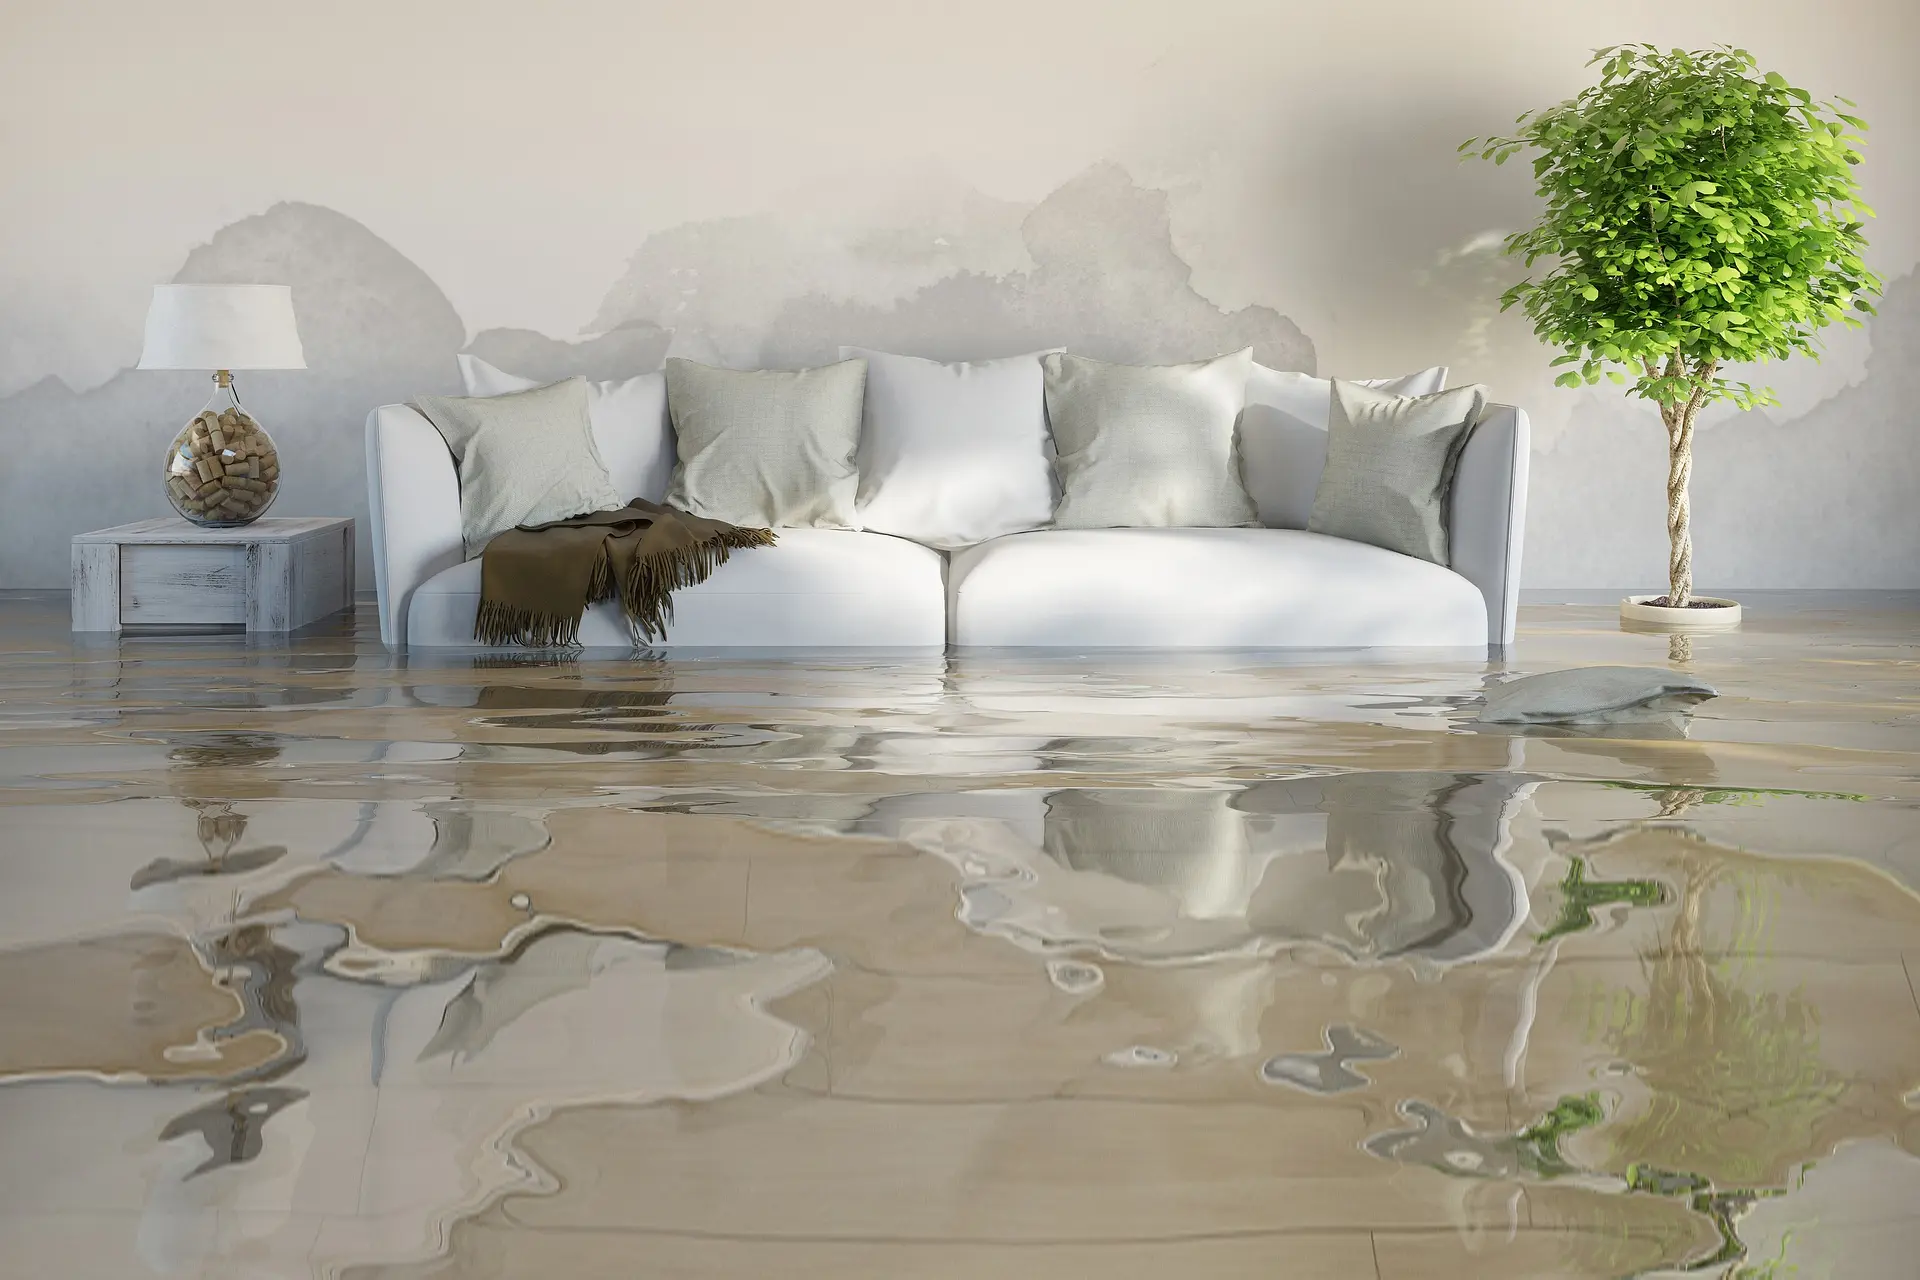 How to Handle Water Damage Emergencies: Professional Restoration Services in Oak Ridge New Jersey